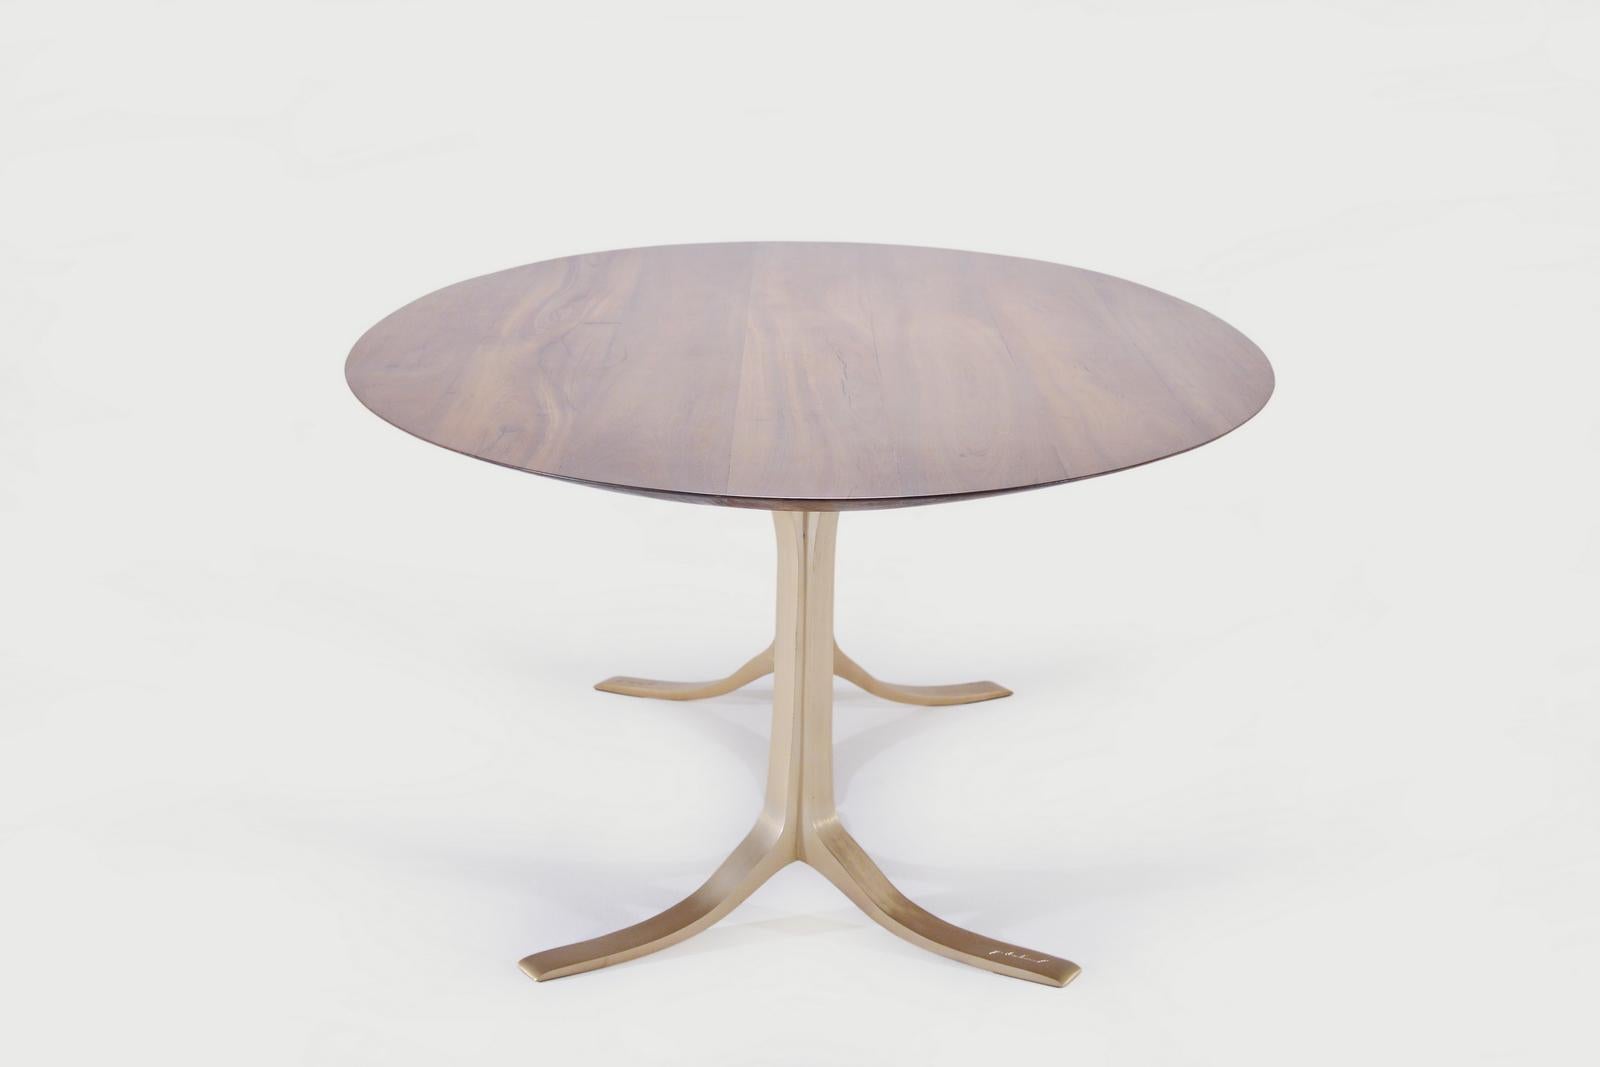 Minimalist Bespoke Oval Table, Reclaimed Hardwood with Brass Base, by P. Tendercool For Sale